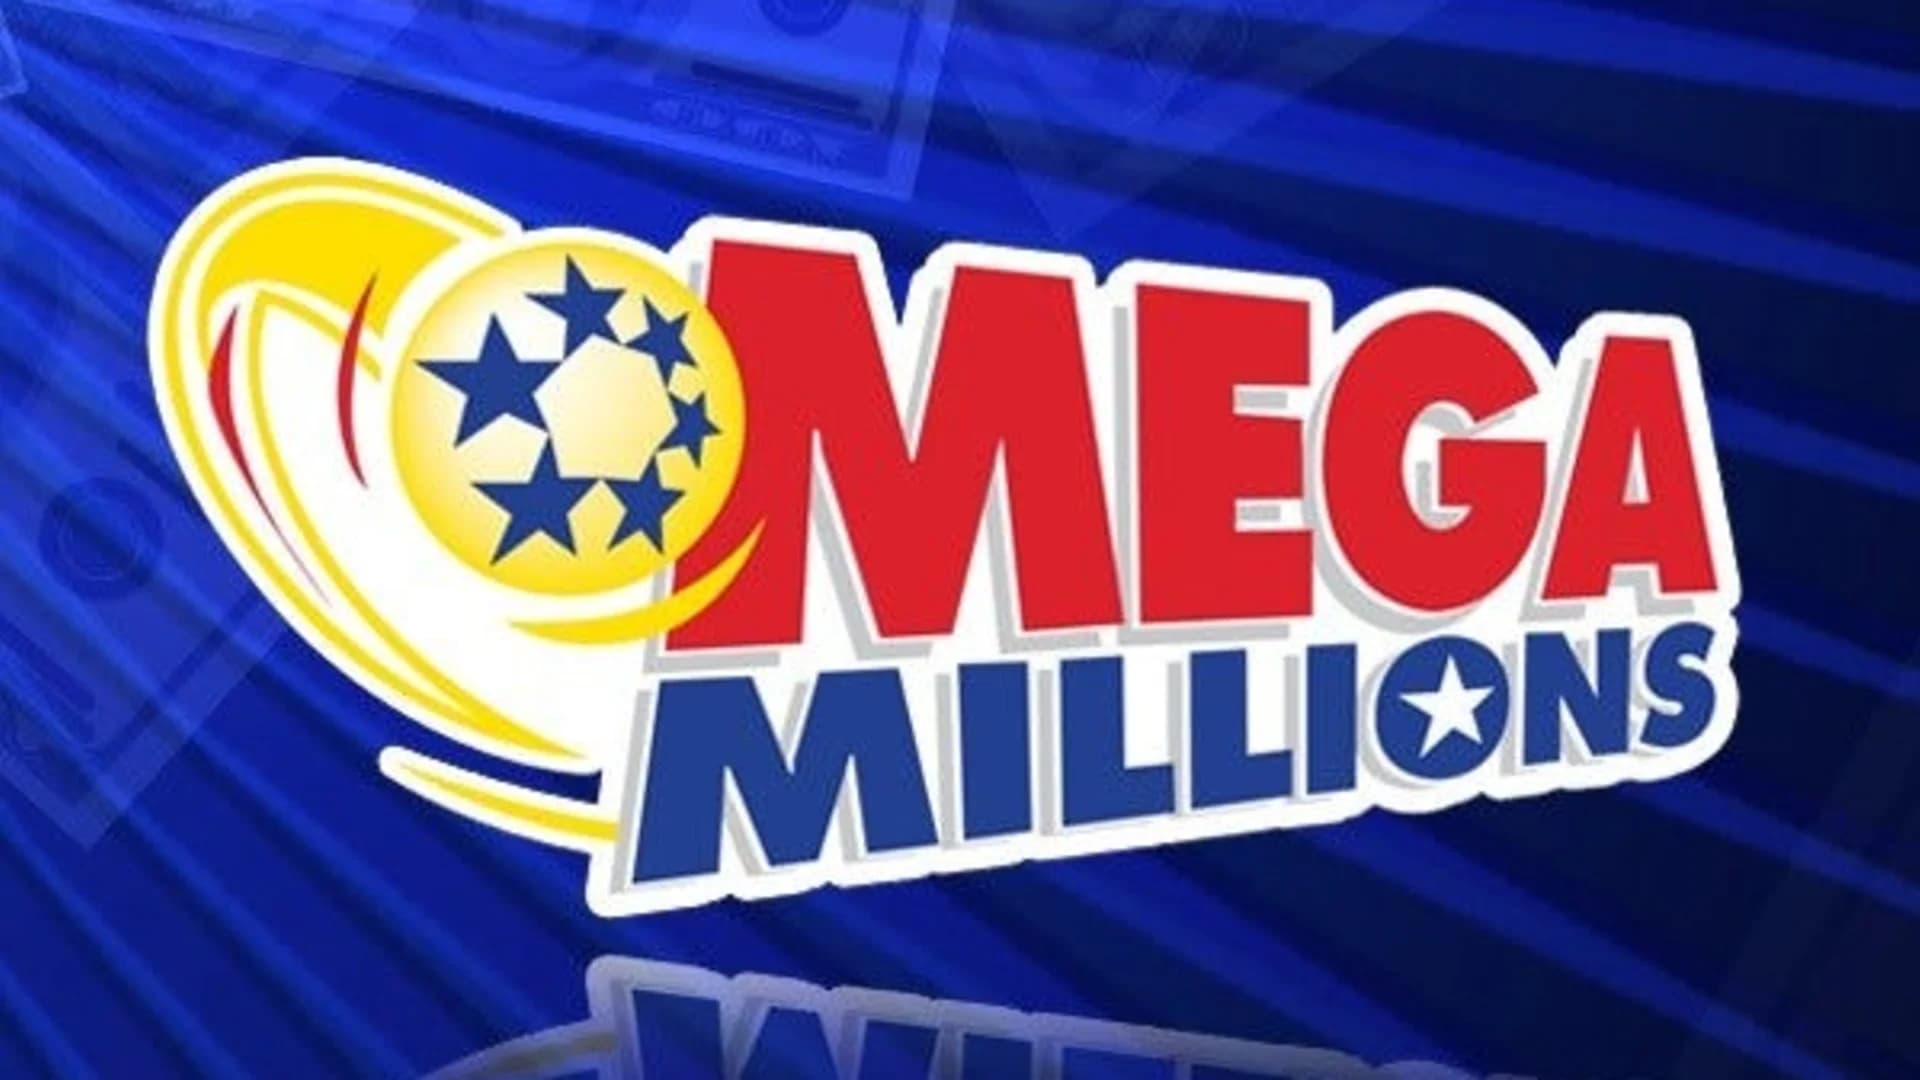 Mega Millions jackpot jumps to $970M as drawing approaches